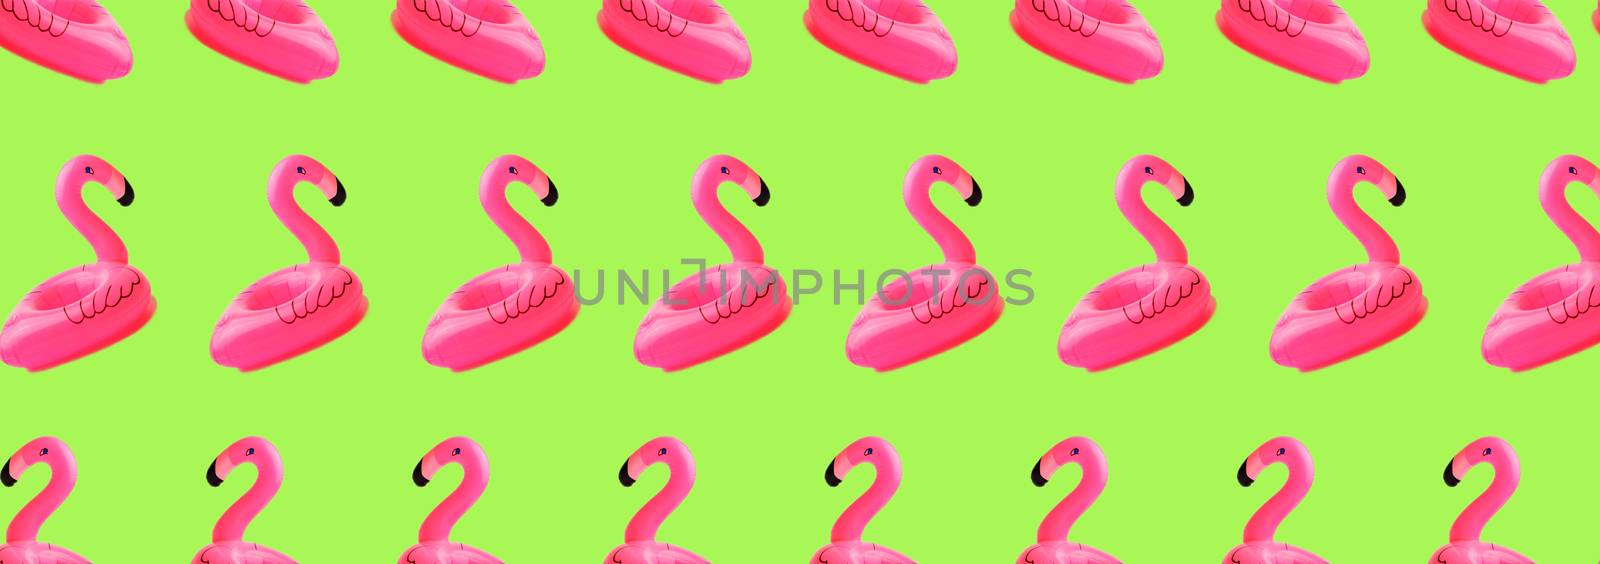 Creative concept of beach and summer vacation.Seamless pattern from inflatable pink mini flamingos on a green background. Floating inflatable flamingo. Flamingo Trend Inflatable Toy.Summer background